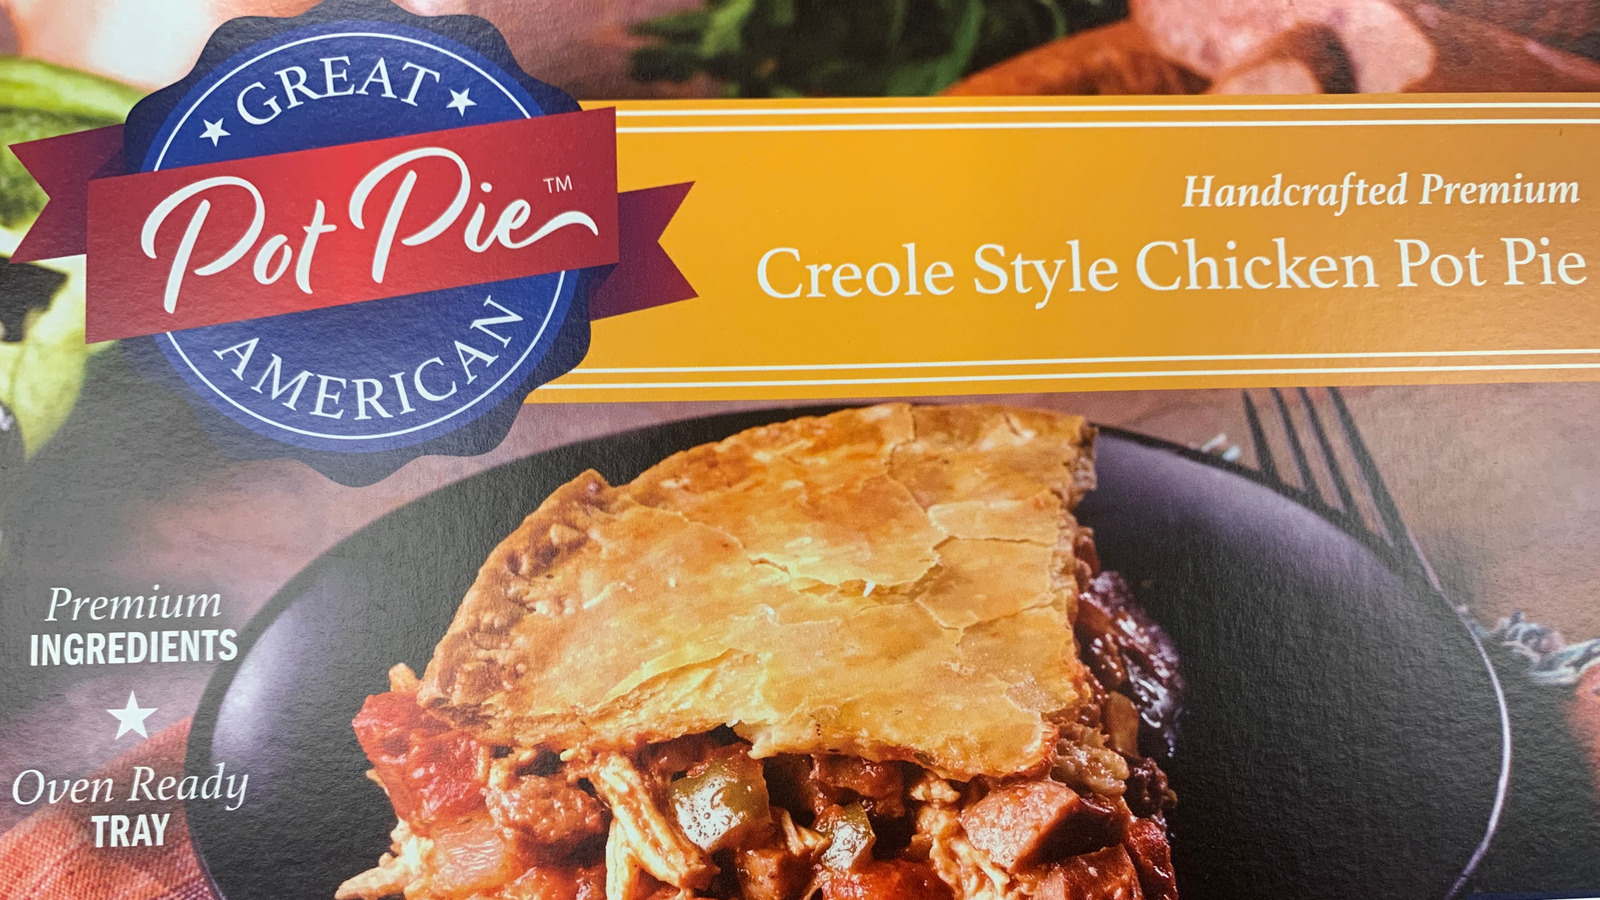 What You Need To Know About The Frozen Chicken Pot Pie Recall